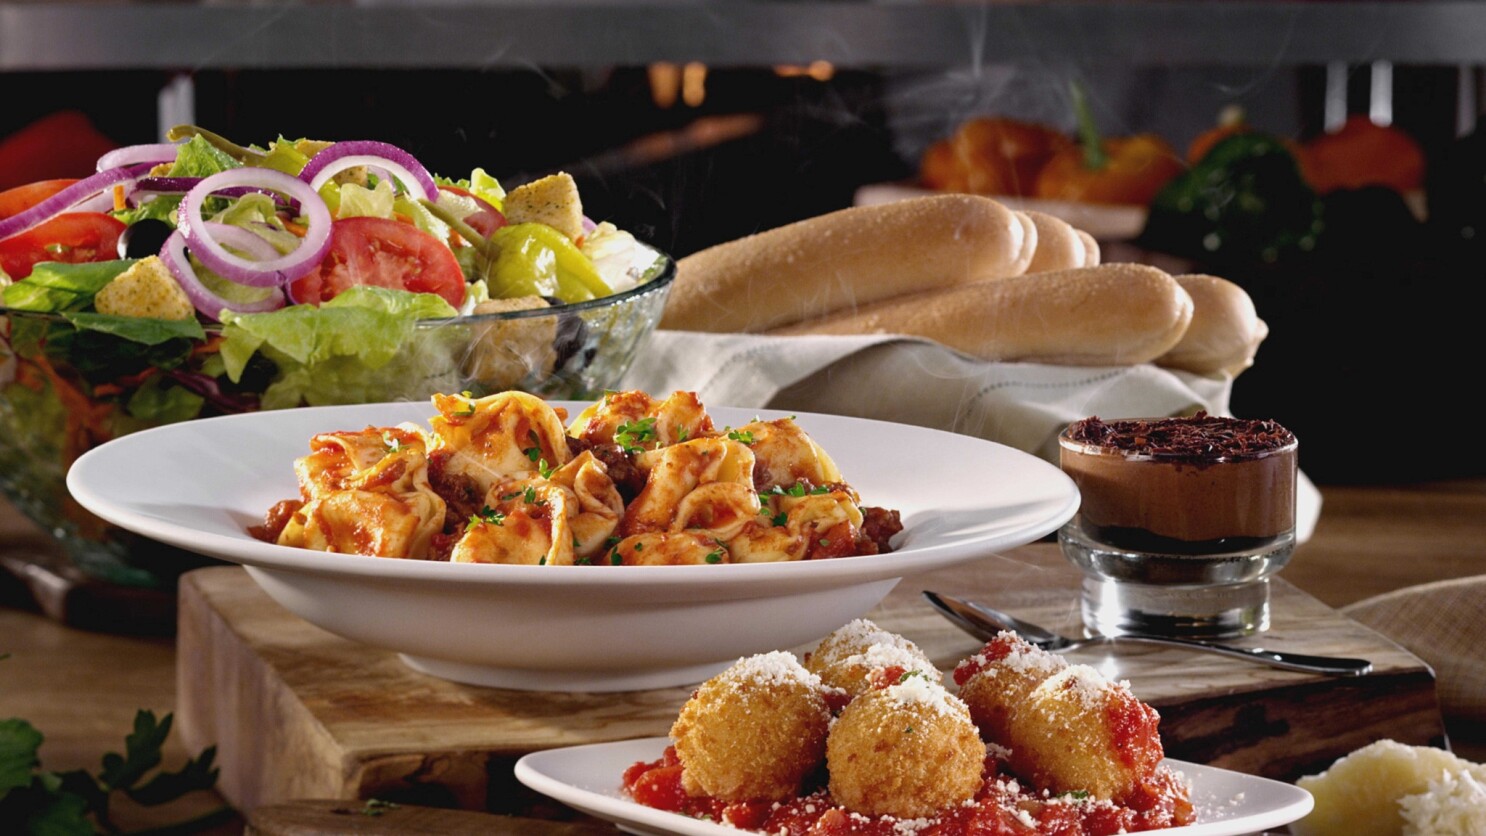 Olive Garden Offers Free Child Care For A Date Night At The